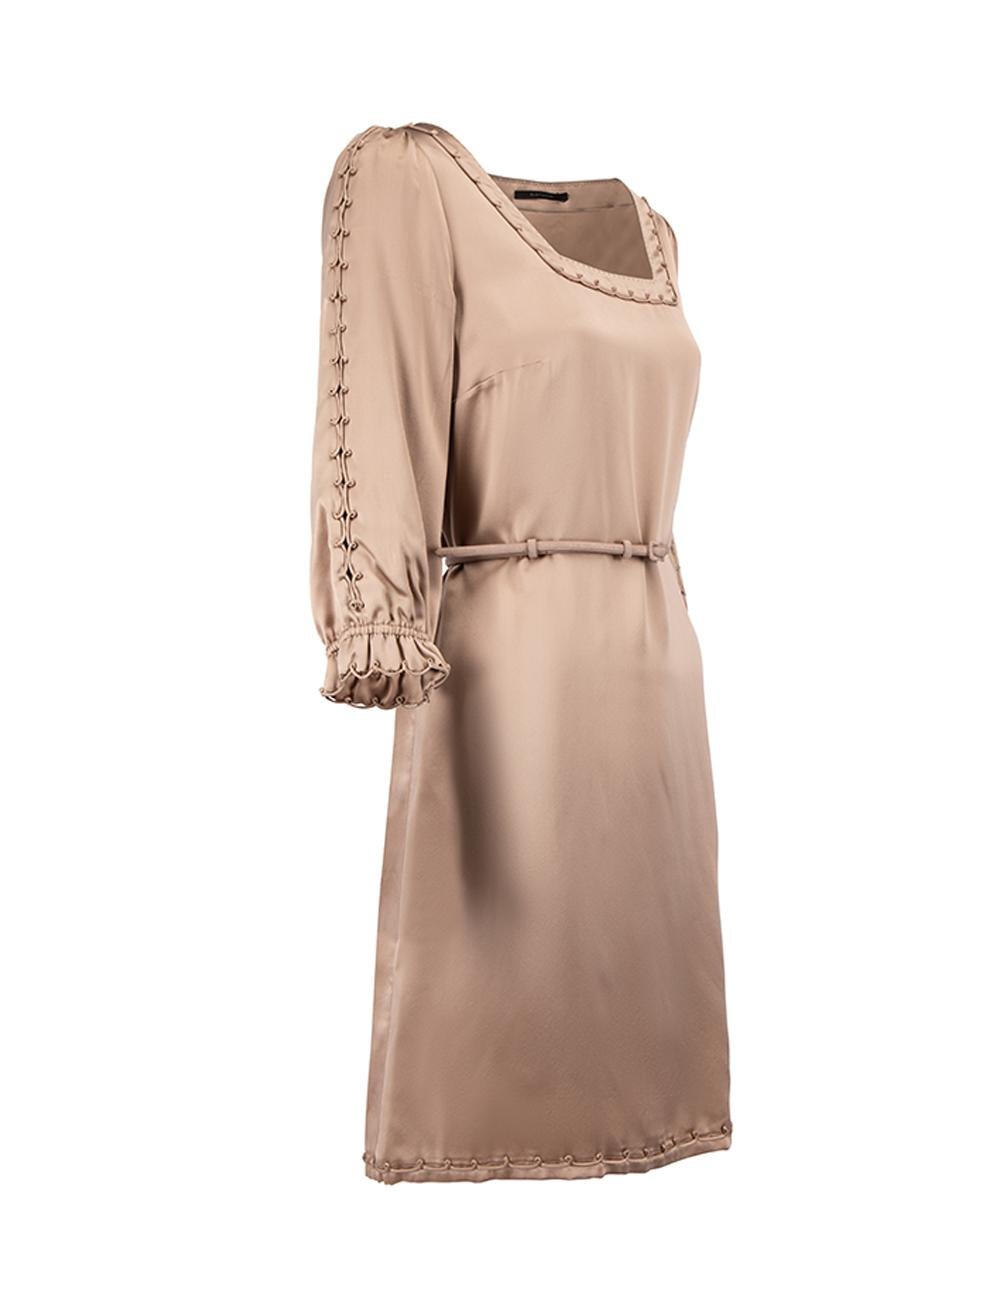 CONDITION is Very good. Minimal wear to dress is evident. Visible wear to the leather belt where the leather has peeled off on this used Elie Tahari designer resale item. 



Details


Purple

Silk

Mini dress

Square neckline

Elasticated